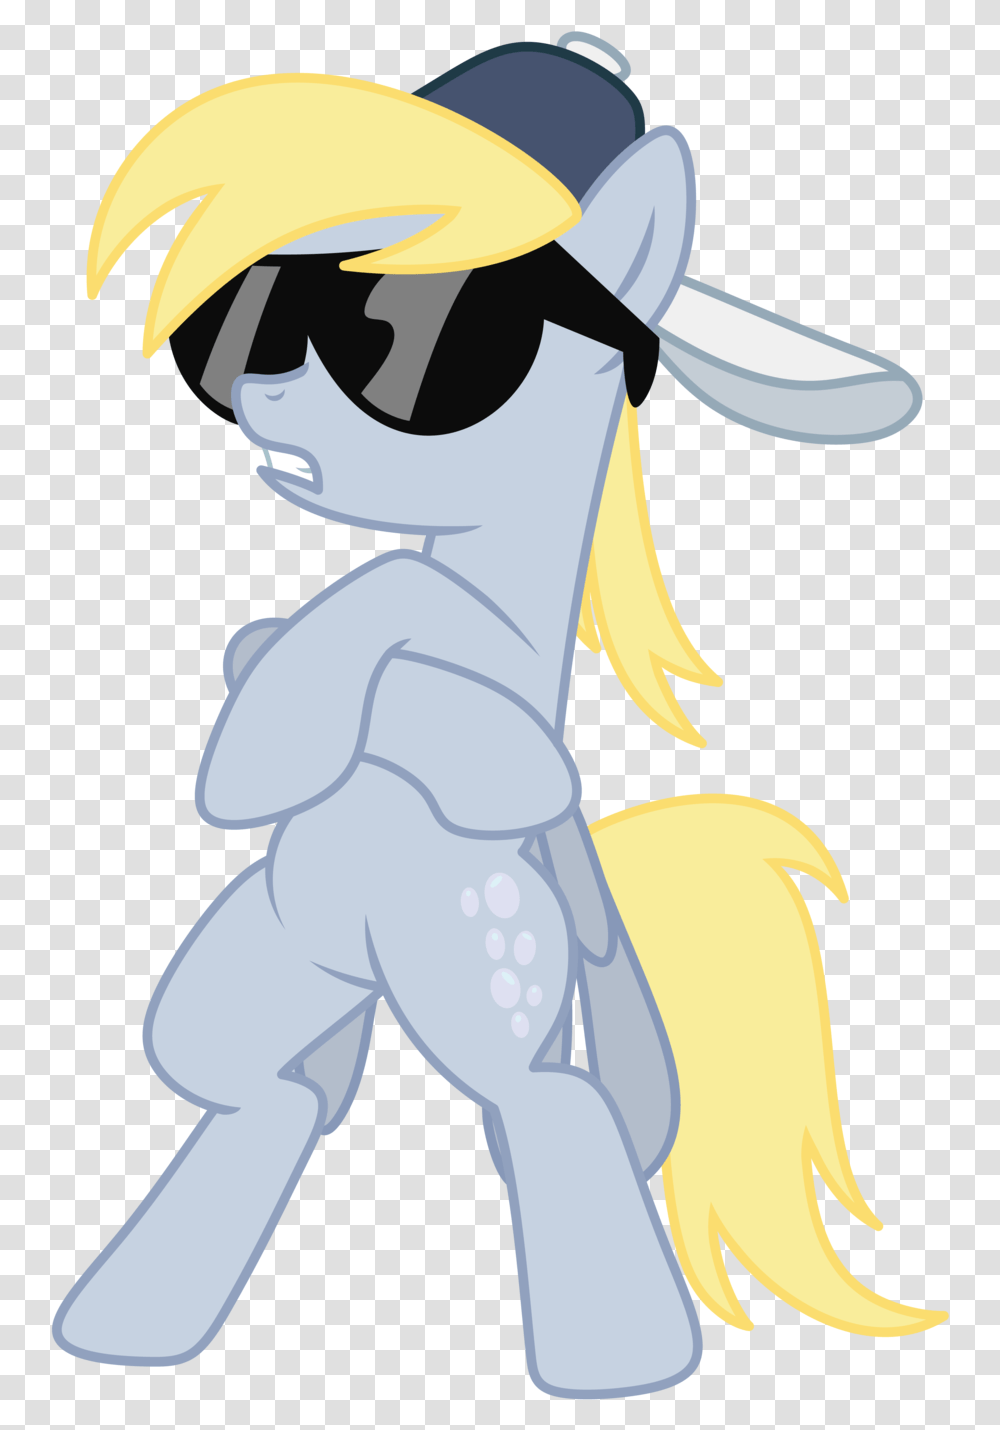 Derpy S Got Swag By Axemgr D4ollqp Rainbow Dash With Glasses, Helmet, Apparel Transparent Png